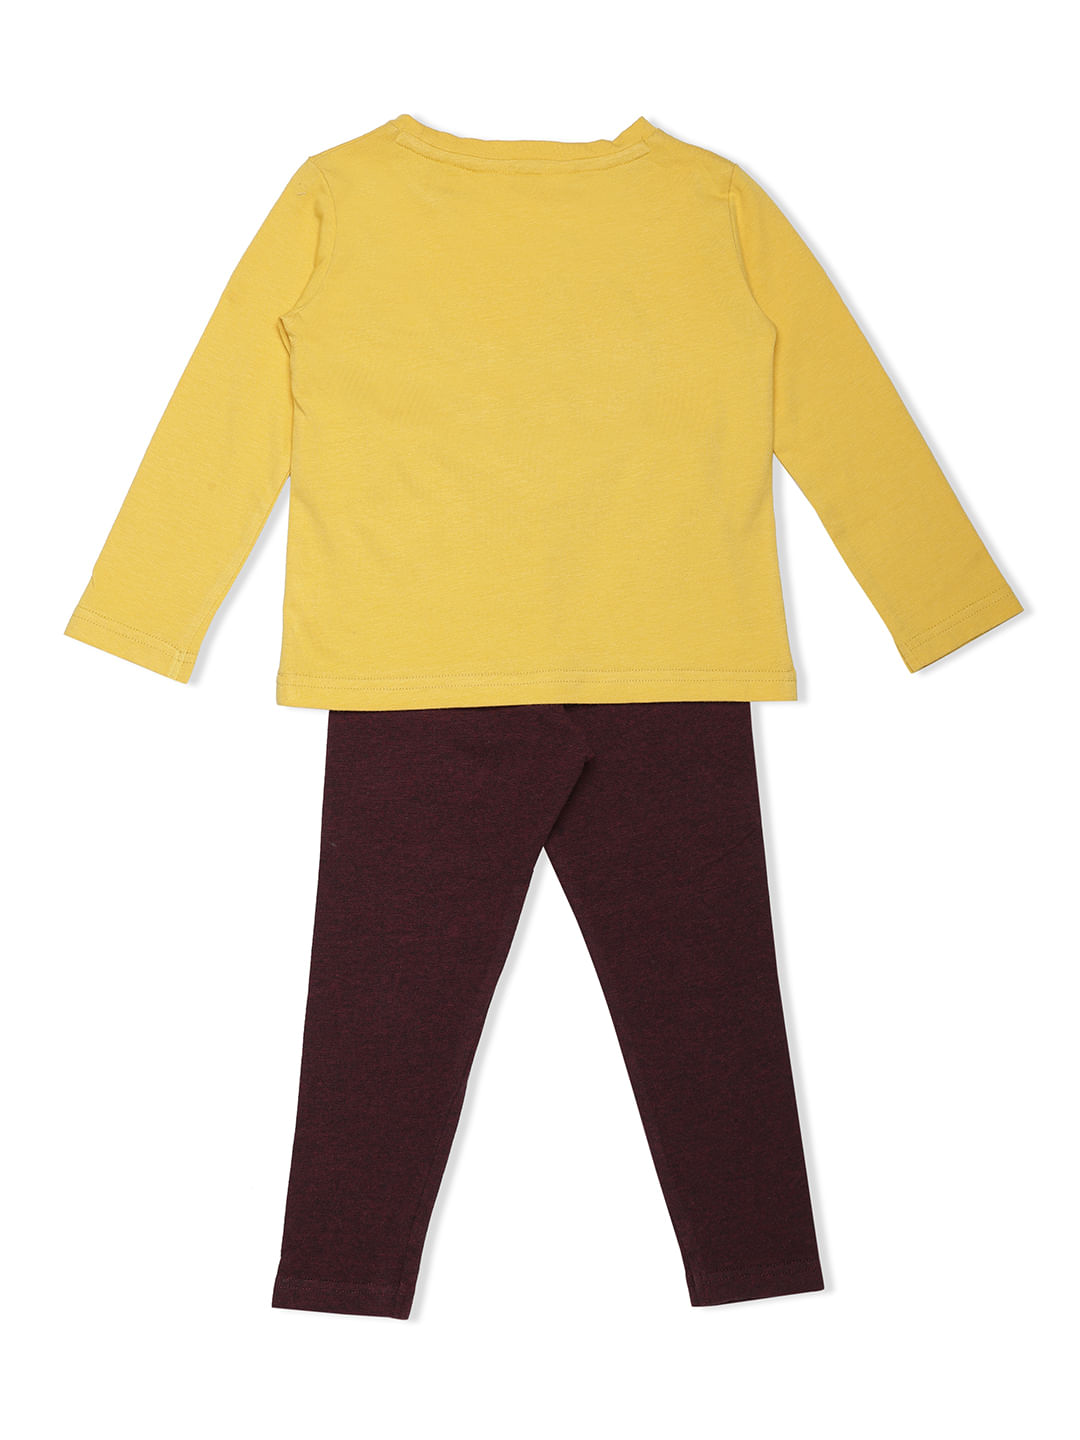 Our Girls Comfy Leggings Tshirt Set with a cute giraffe print is perfect to  step out or stay in